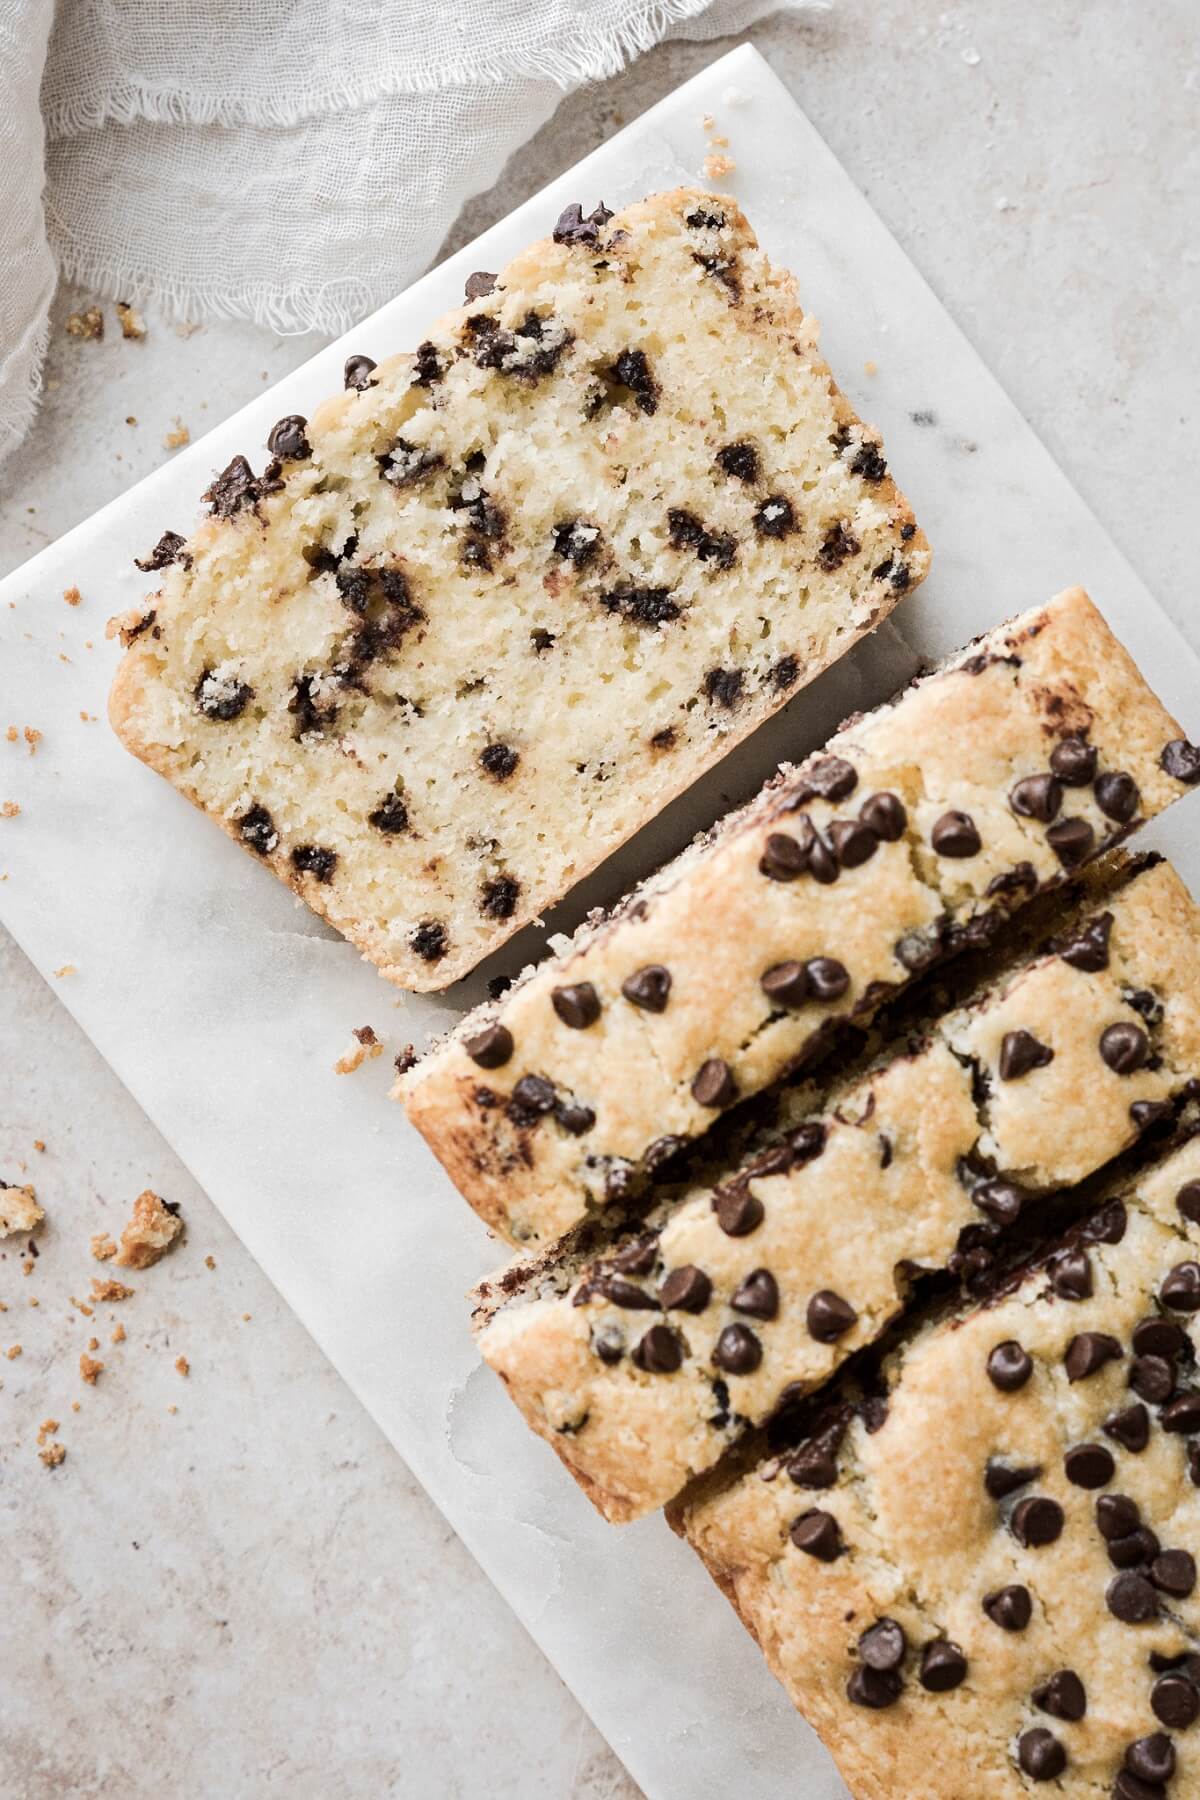 Slices of chocolate chip sour cream loaf cake.